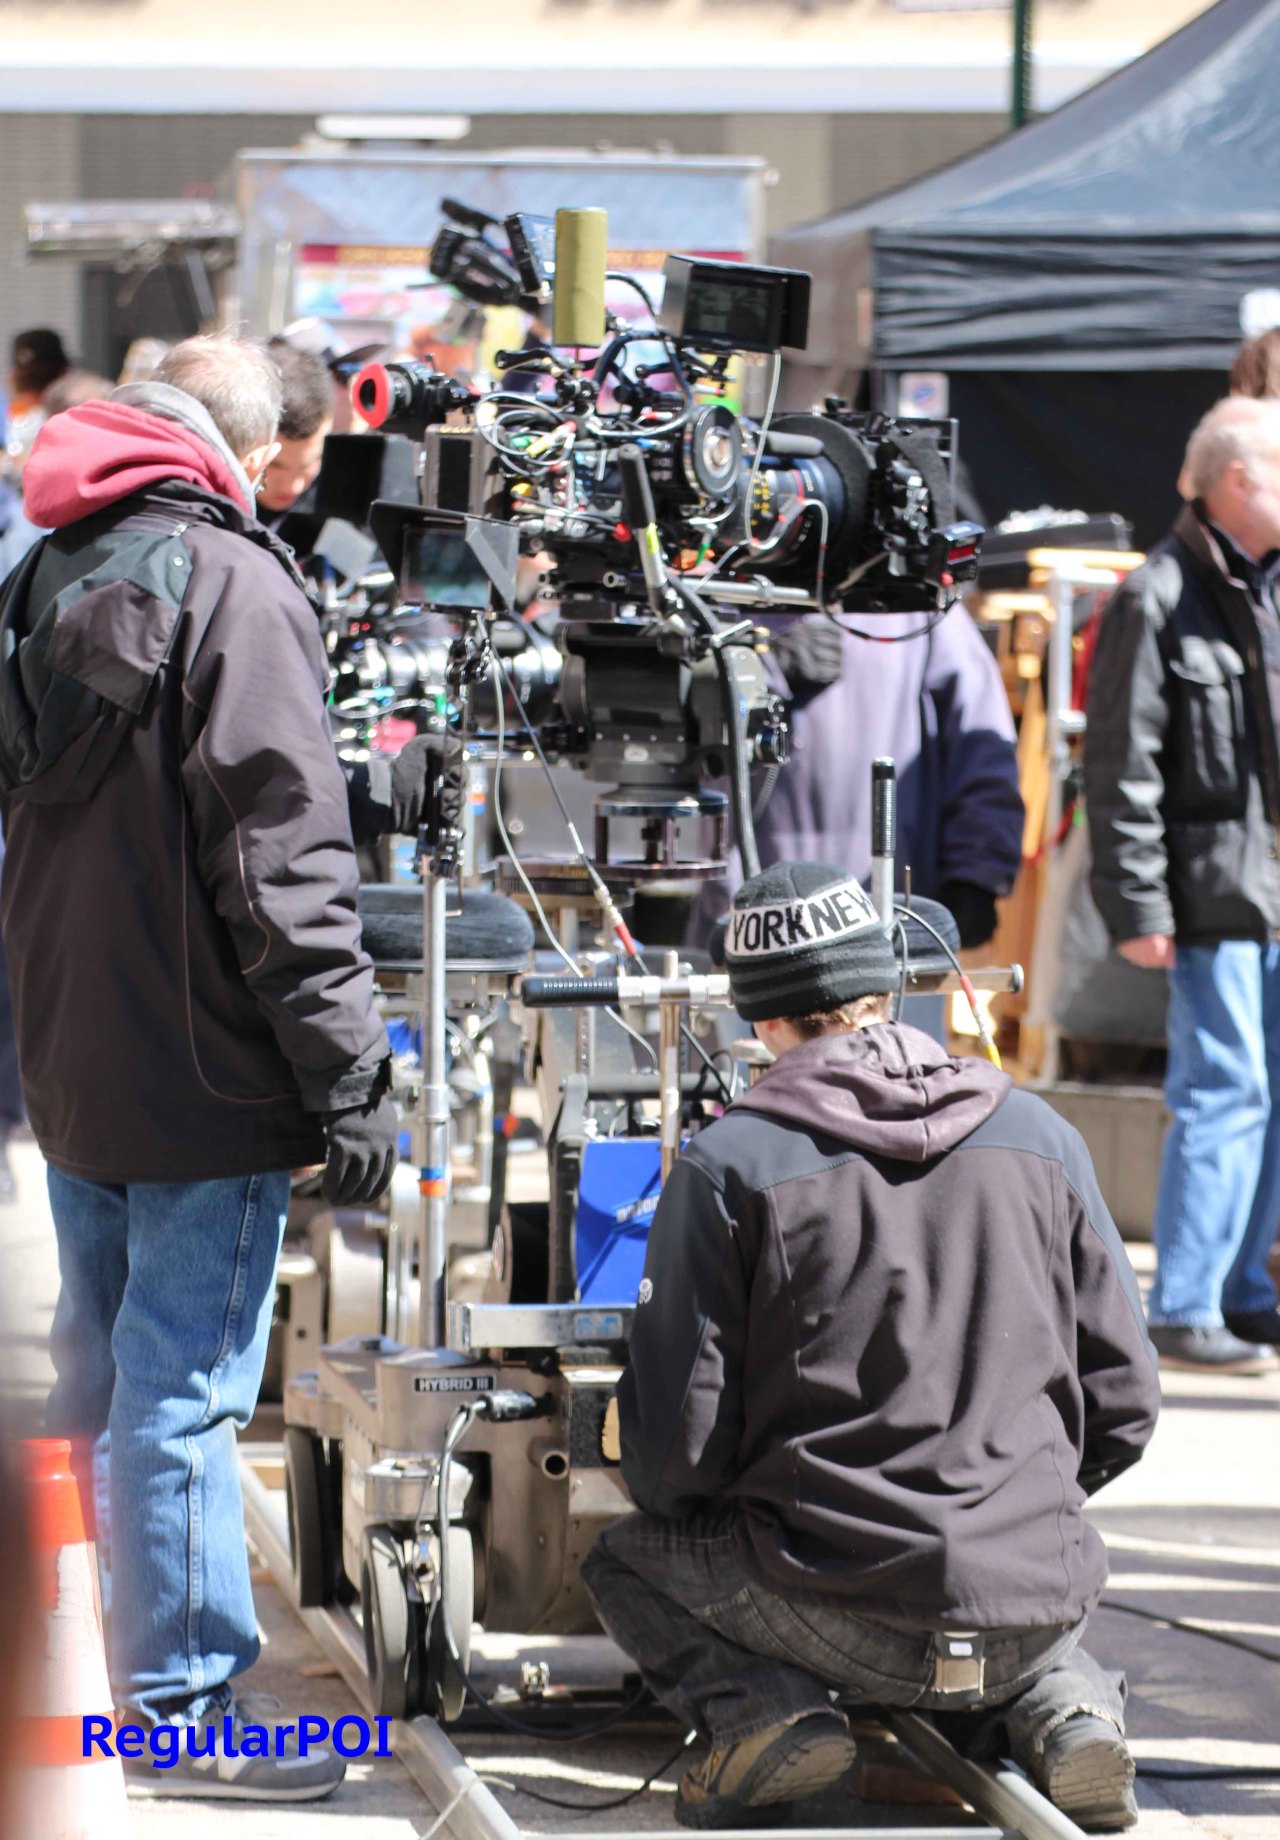 kindaoffkilter:regularpoi:Some BTS from filming of Person of Interest today (March